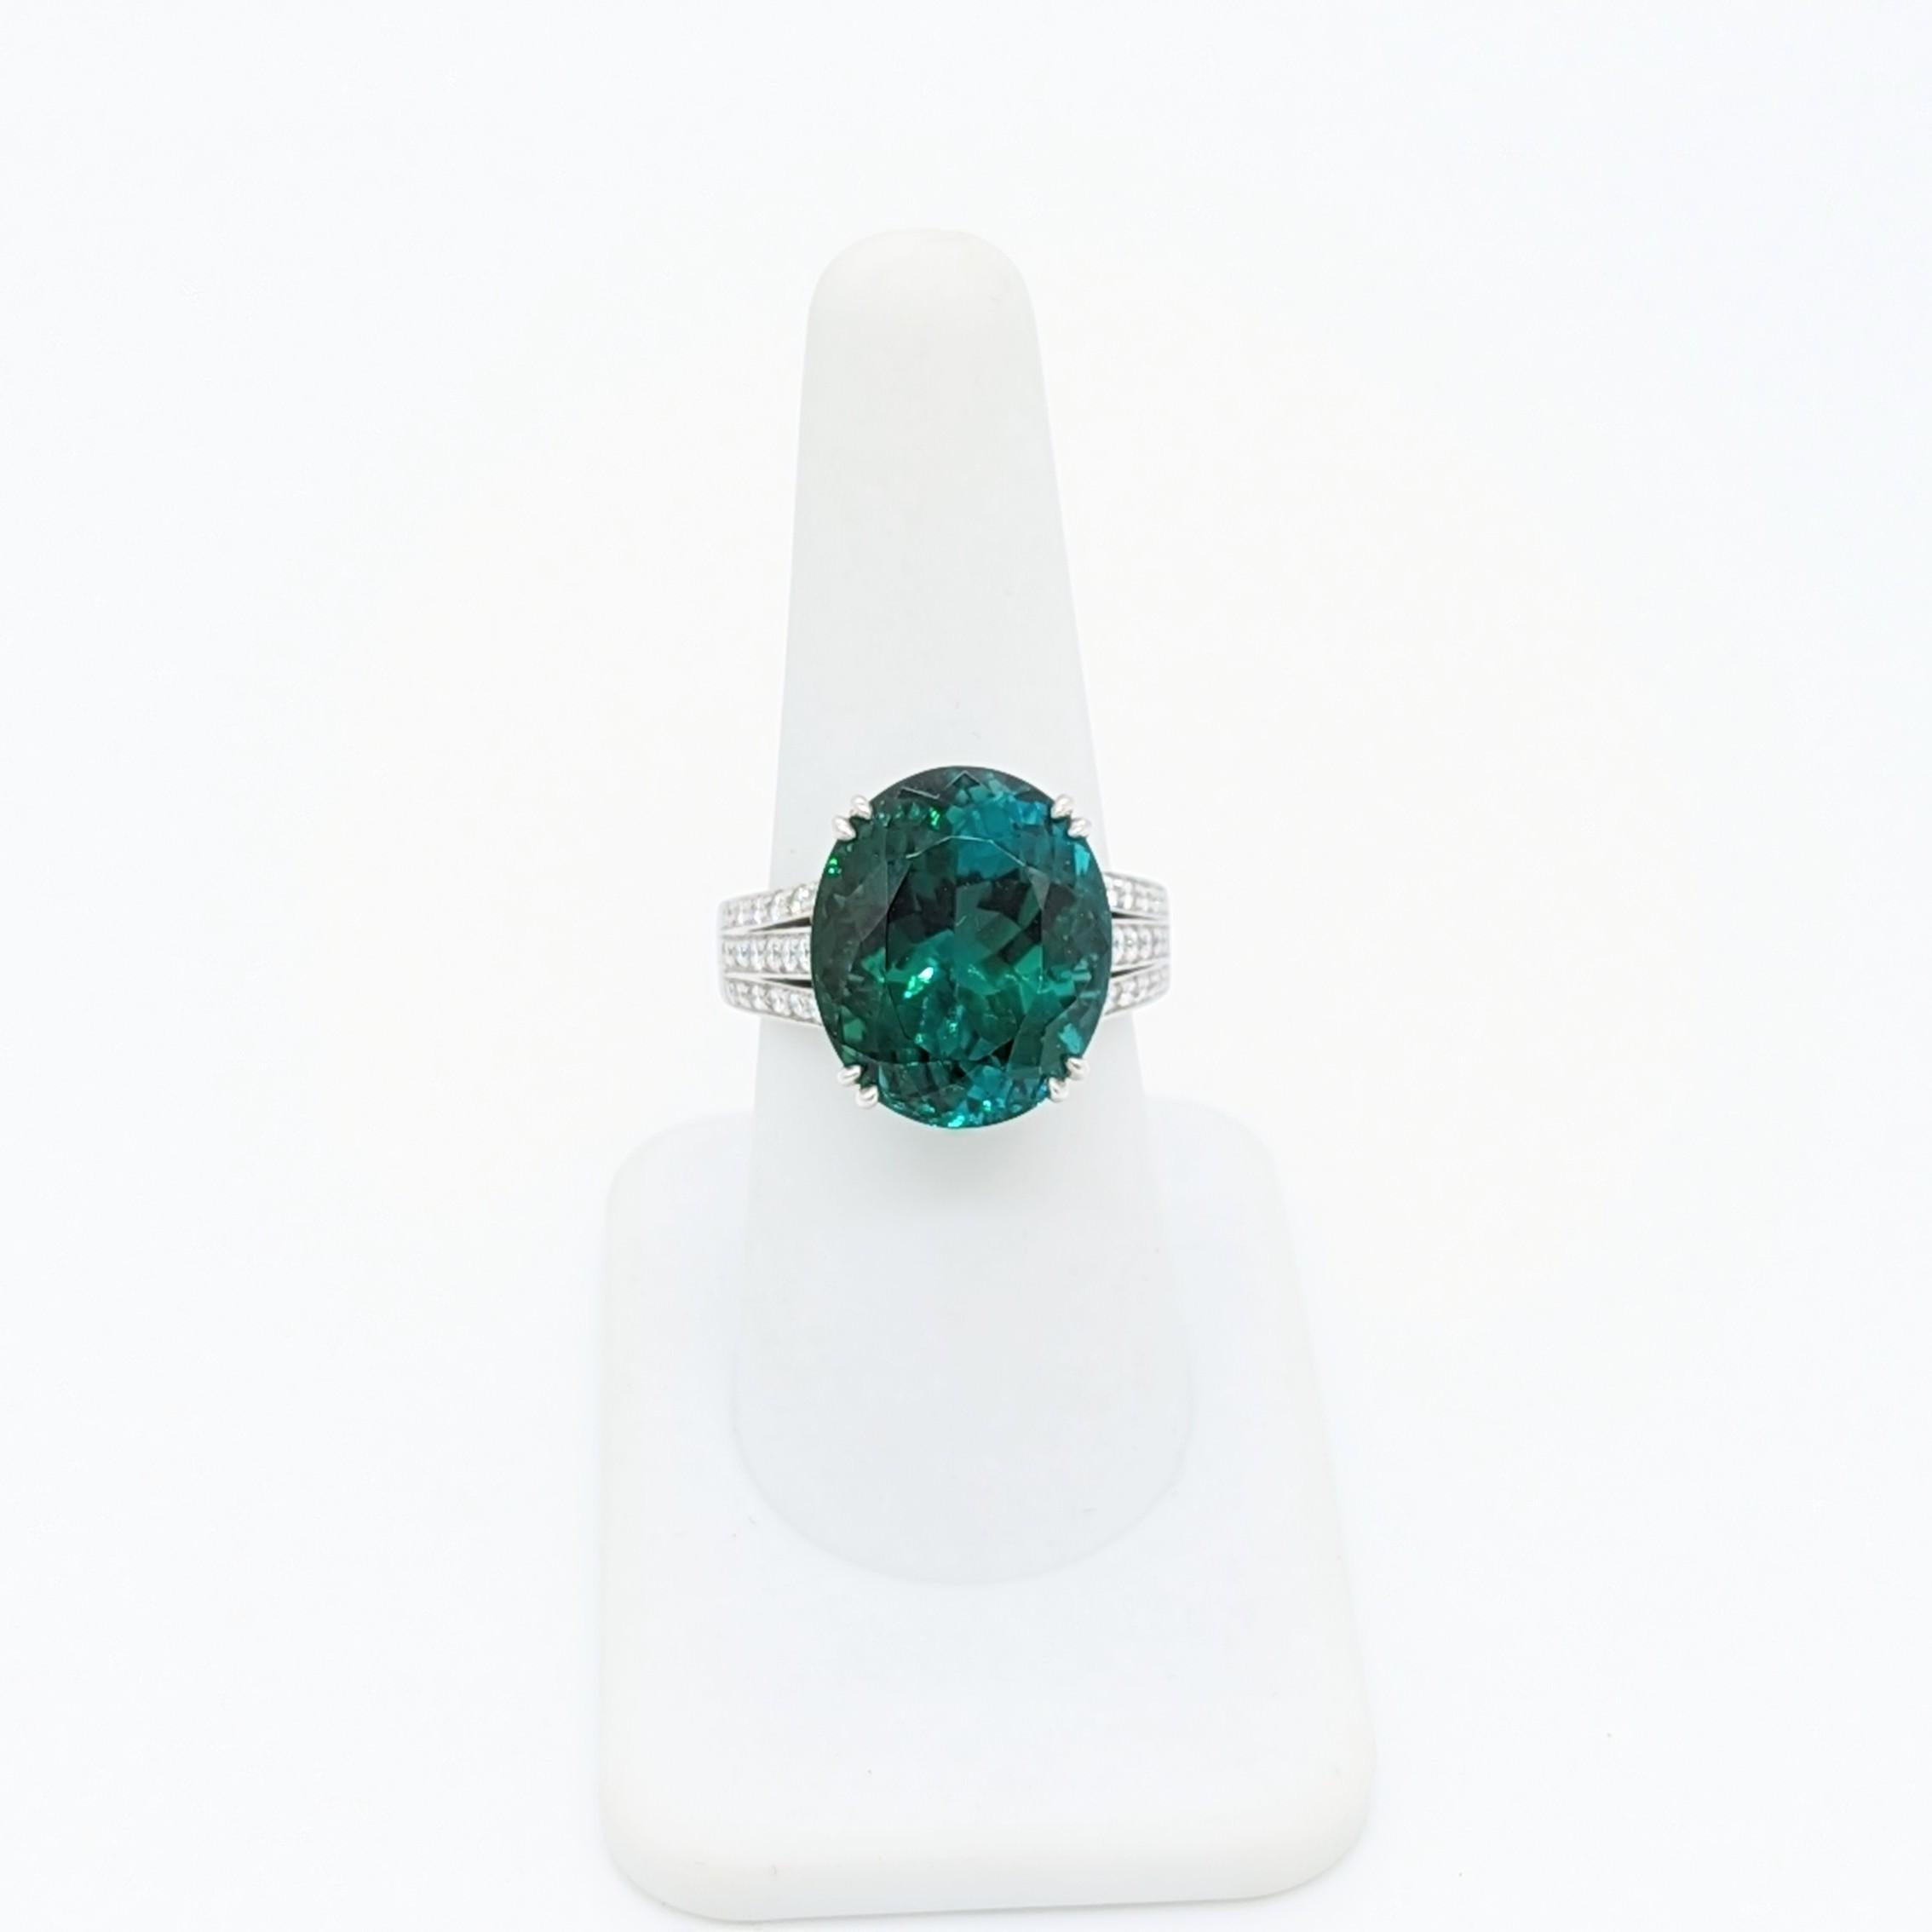 Stunning 8.80 ct. green tourmaline oval with 1.30 ct. good quality, white, and bright diamond rounds.  Handmade in platinum.  Ring size 6.75.  